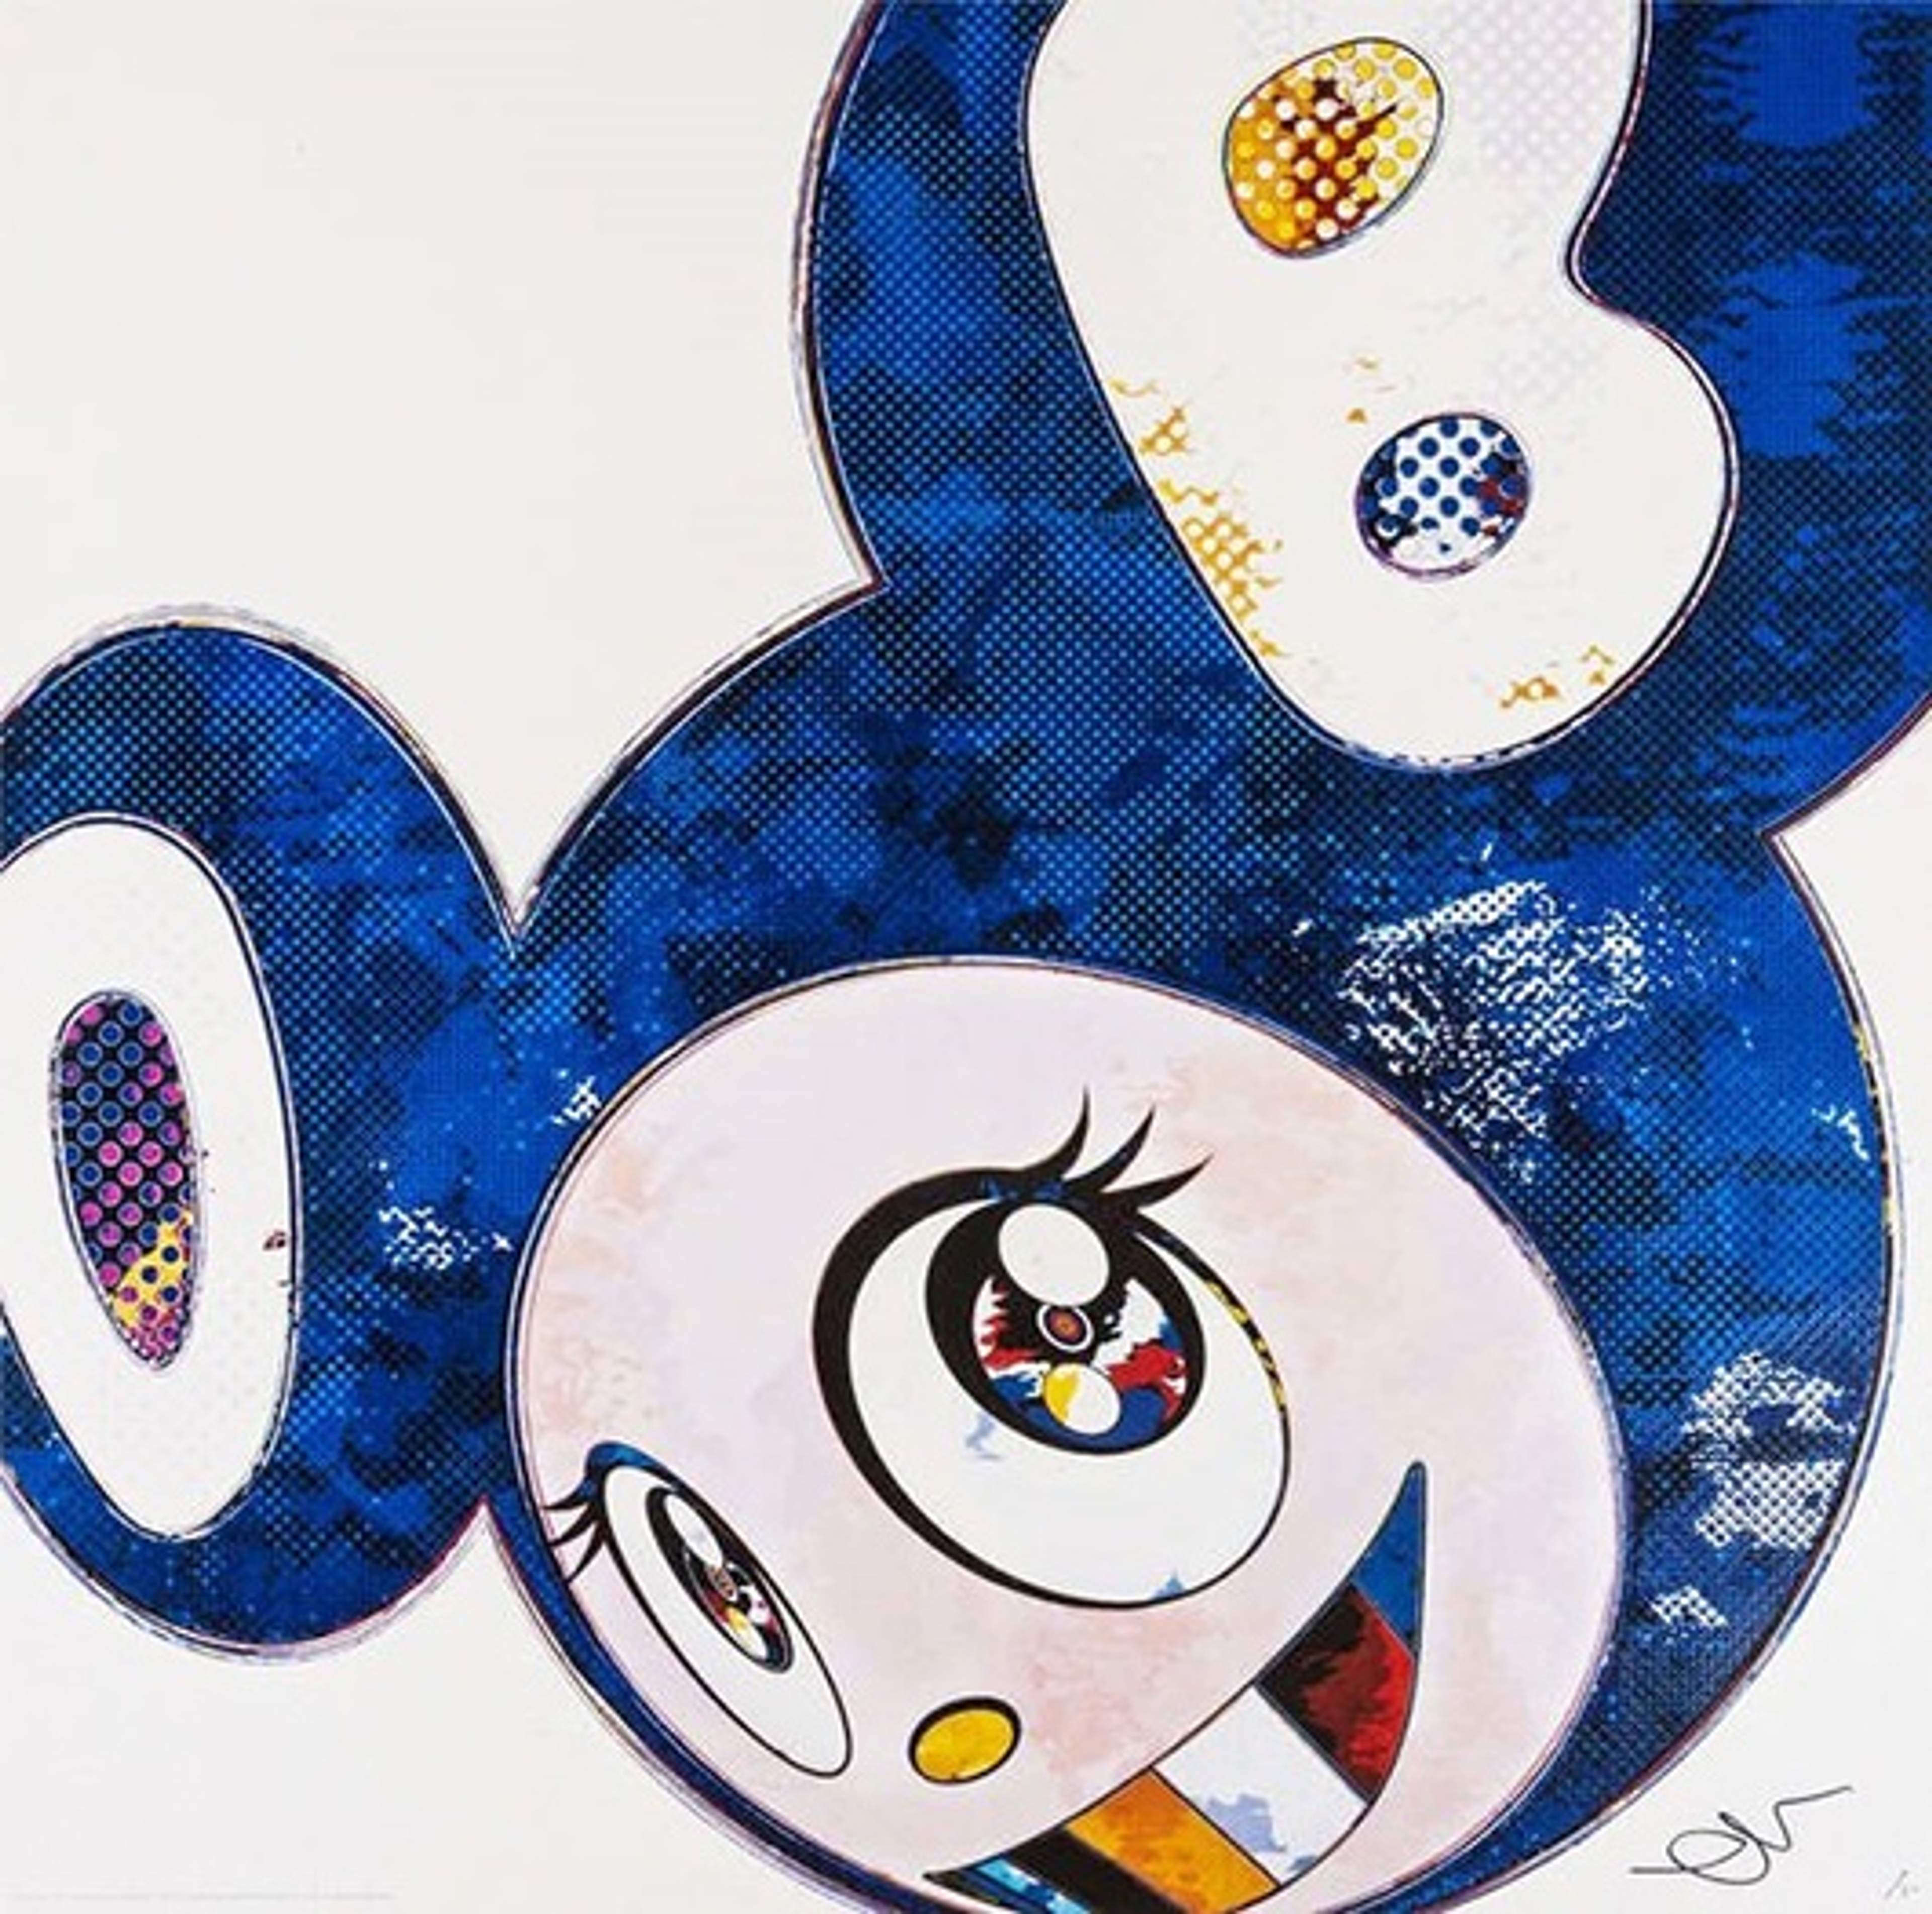 And Then Blue by Takashi Murakami